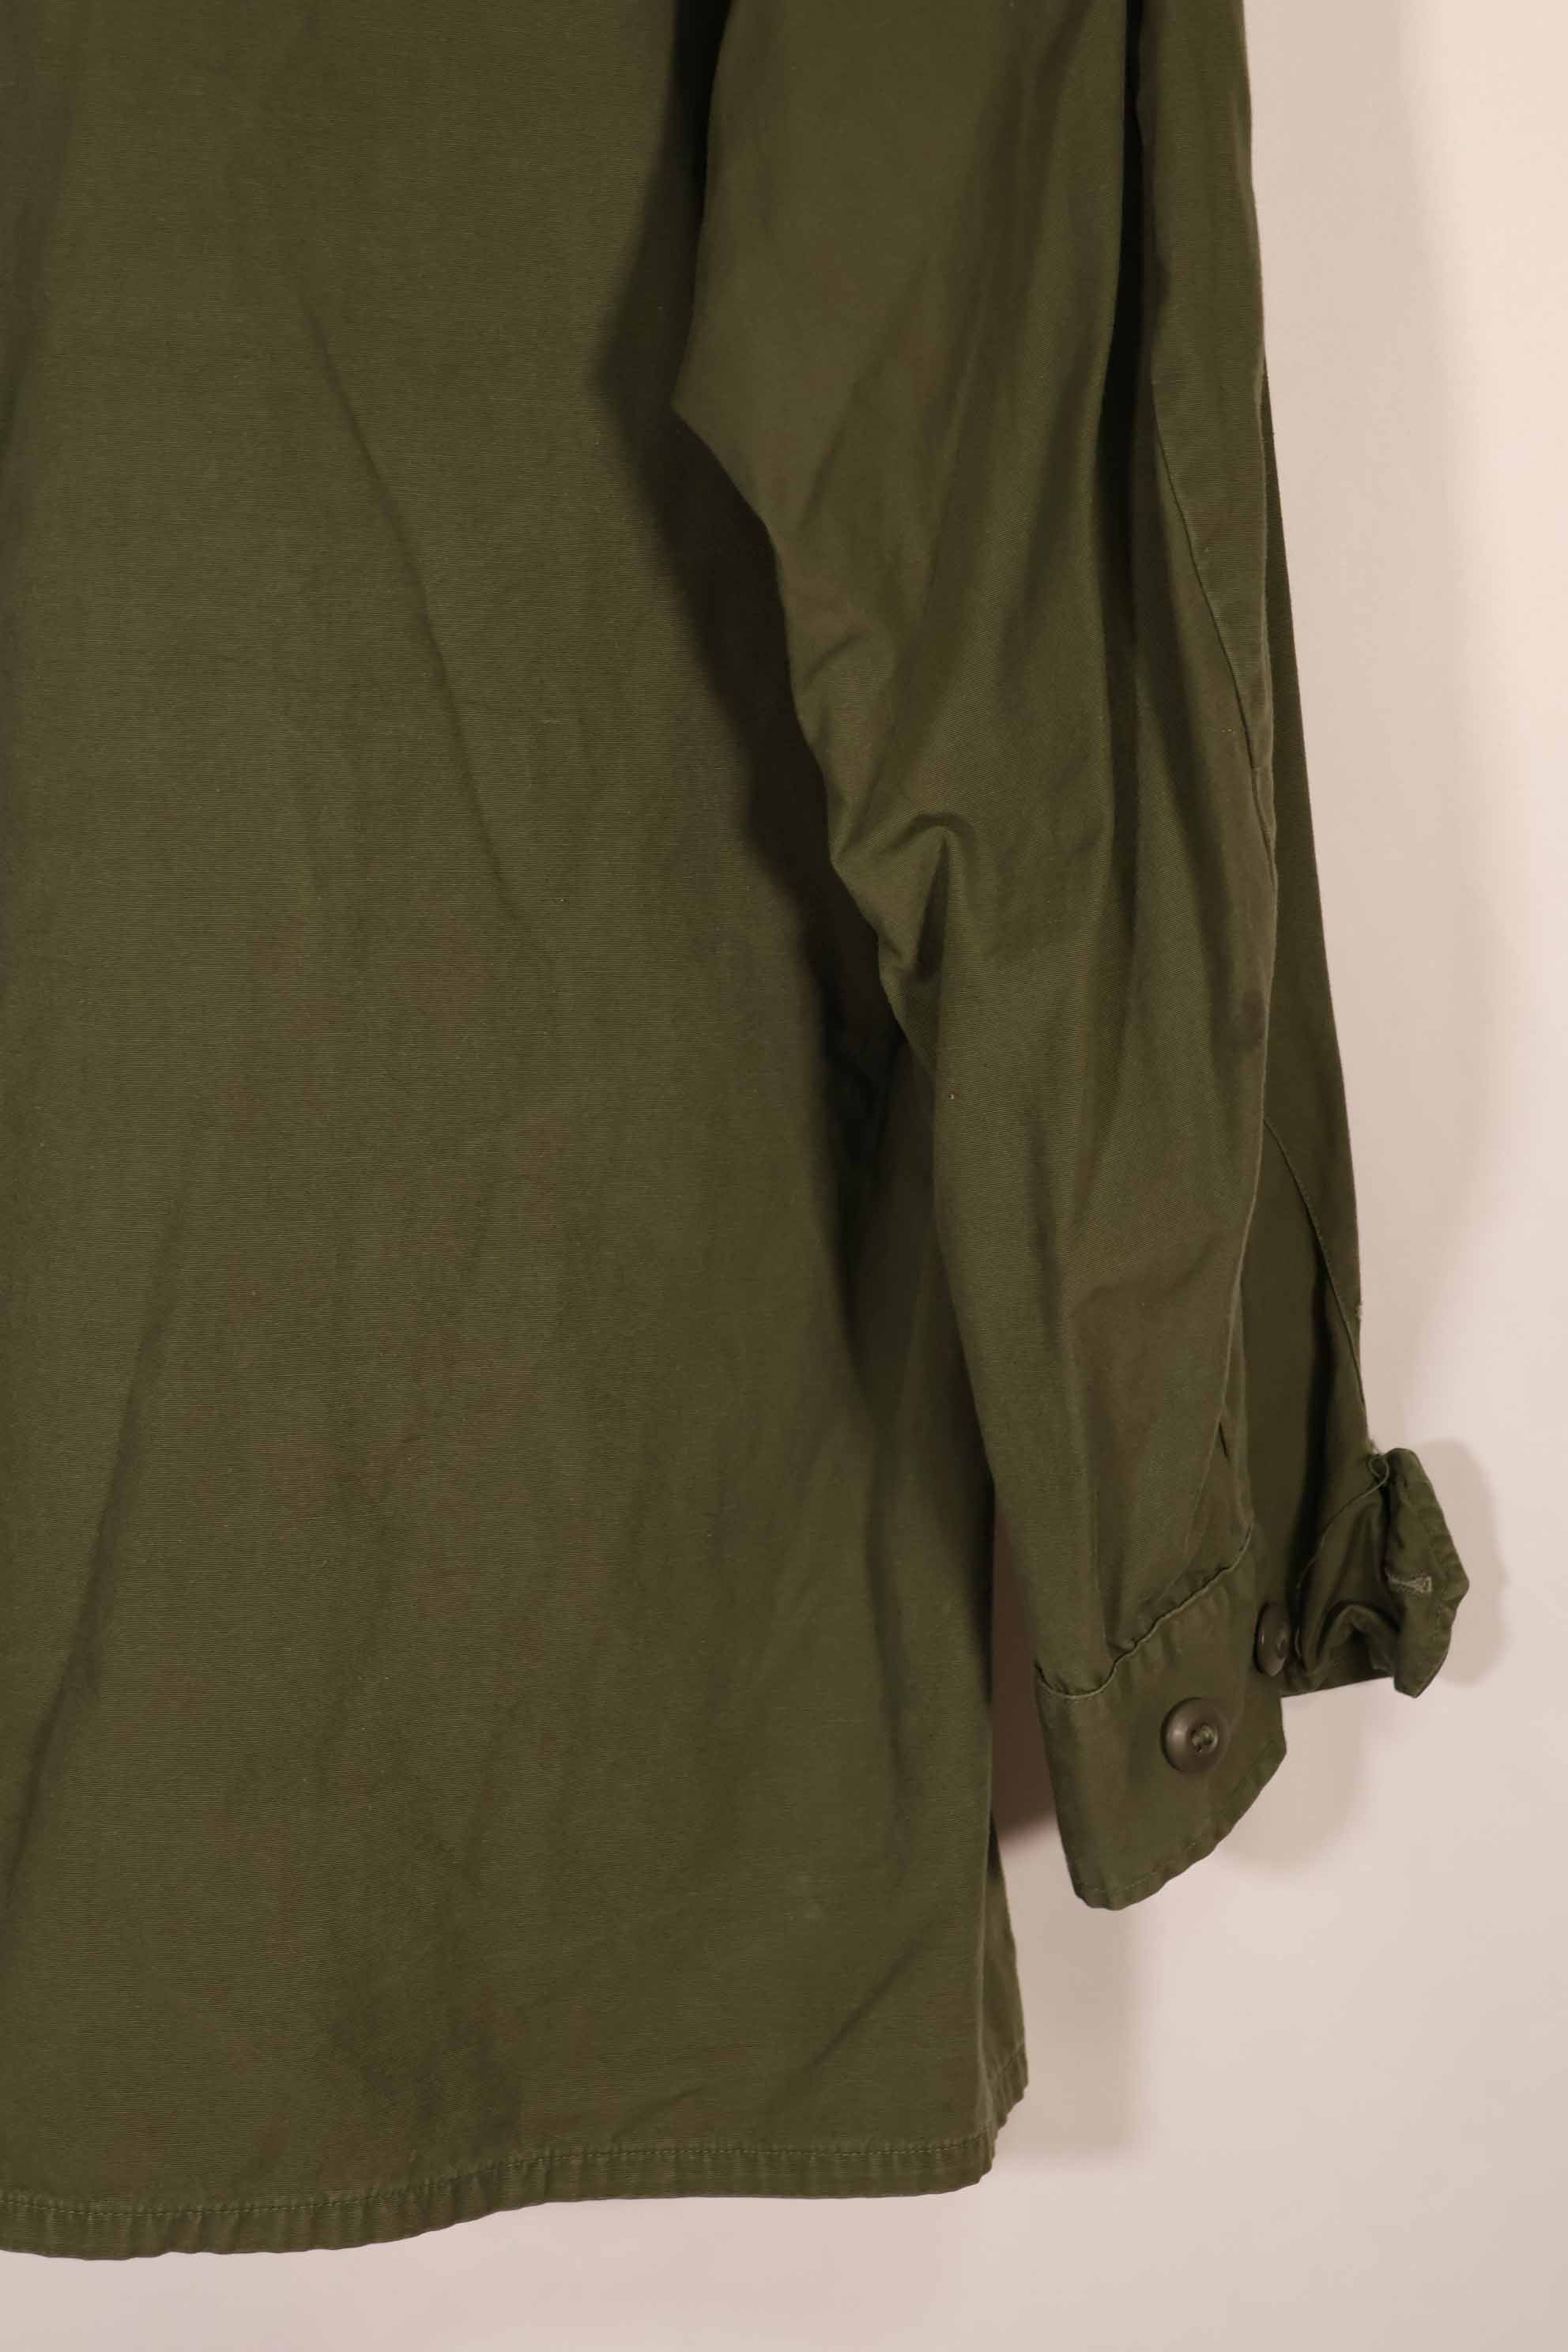 Real 1966-1967 3rd Model Jungle Fatigue Jacket L-R Used